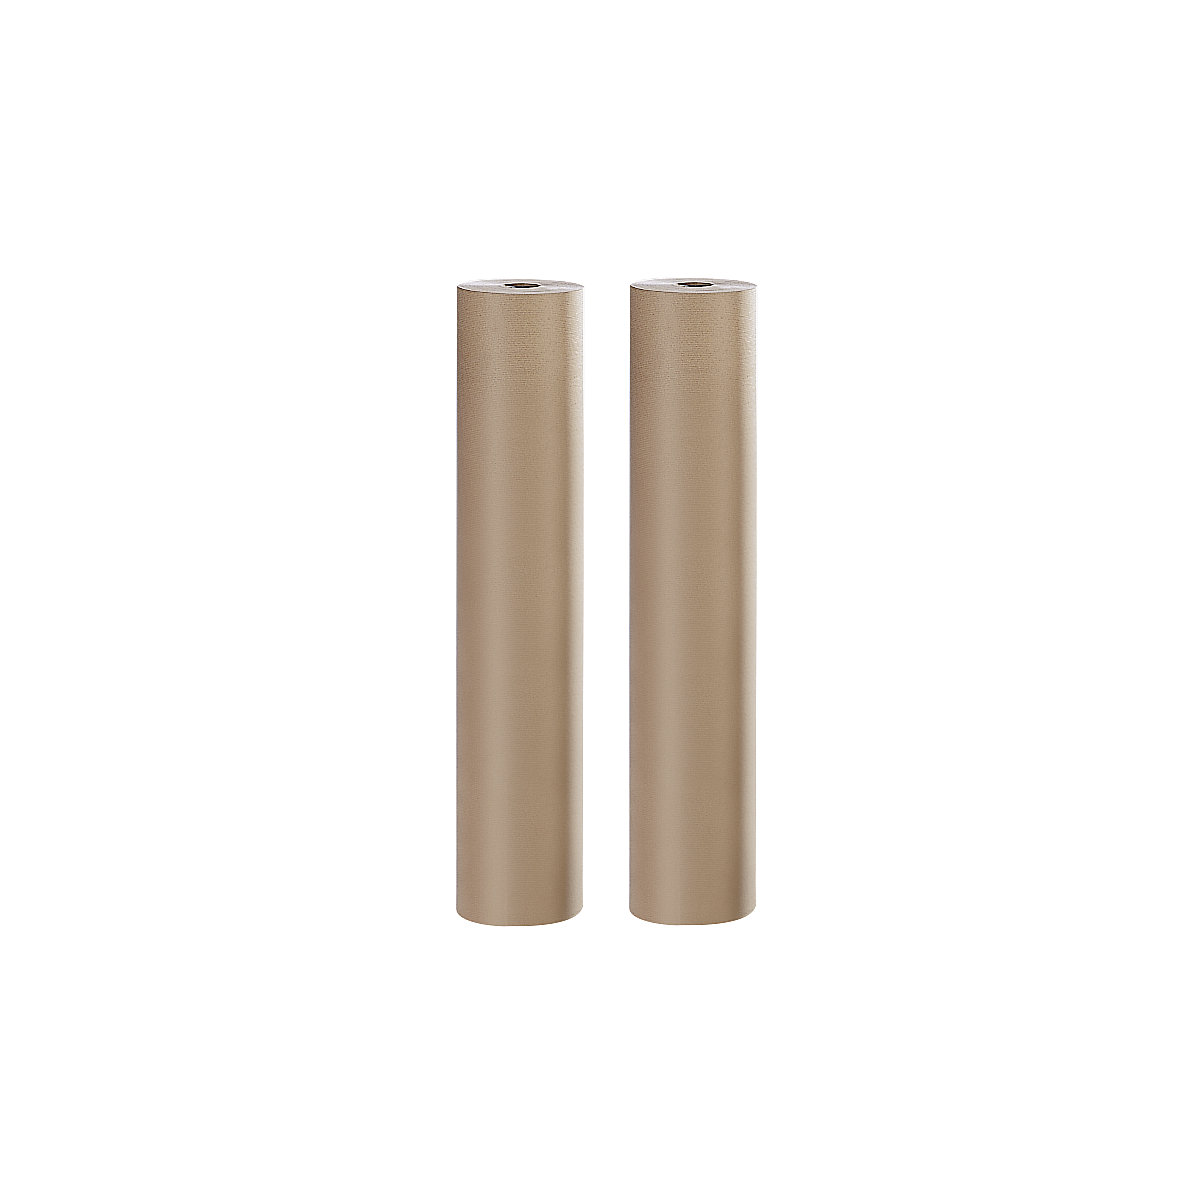 Packing paper, 80 g/m², Secare roll, 1000 mm wide, pack of 2 rolls-2